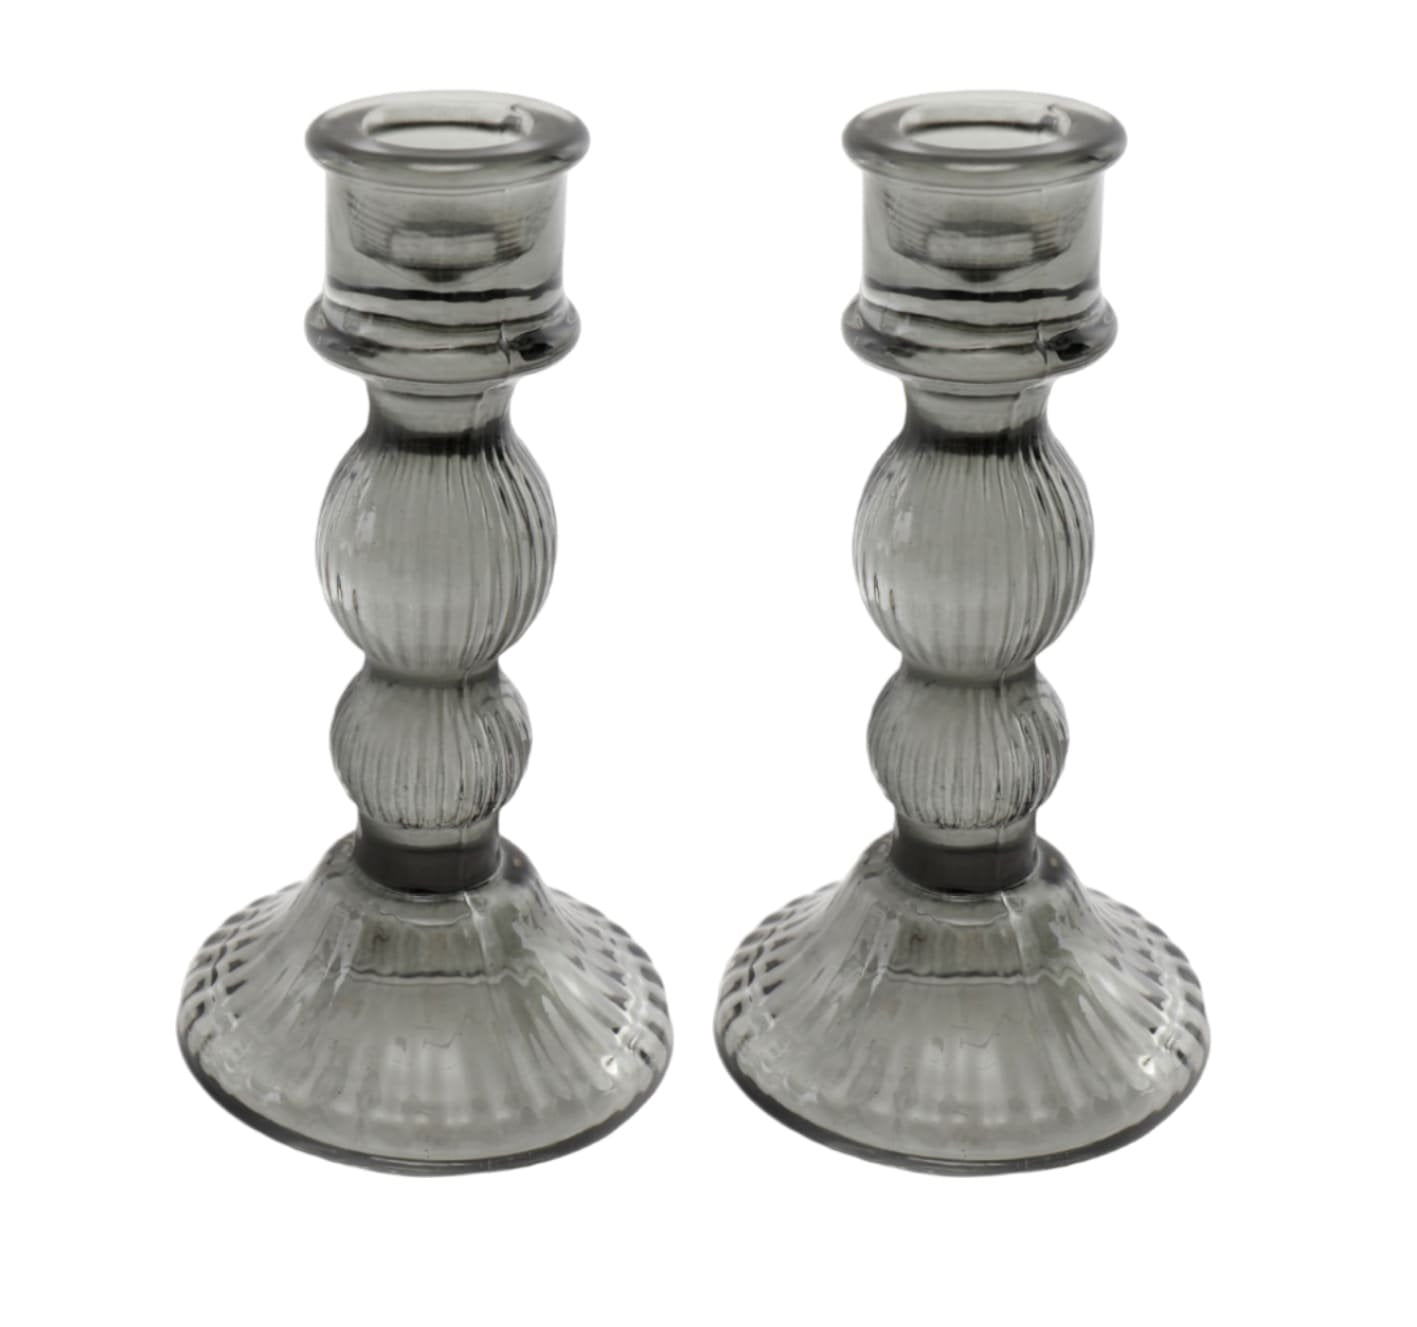 Pair of Glass Taper Candle Holders Black - a Cheeky Plant